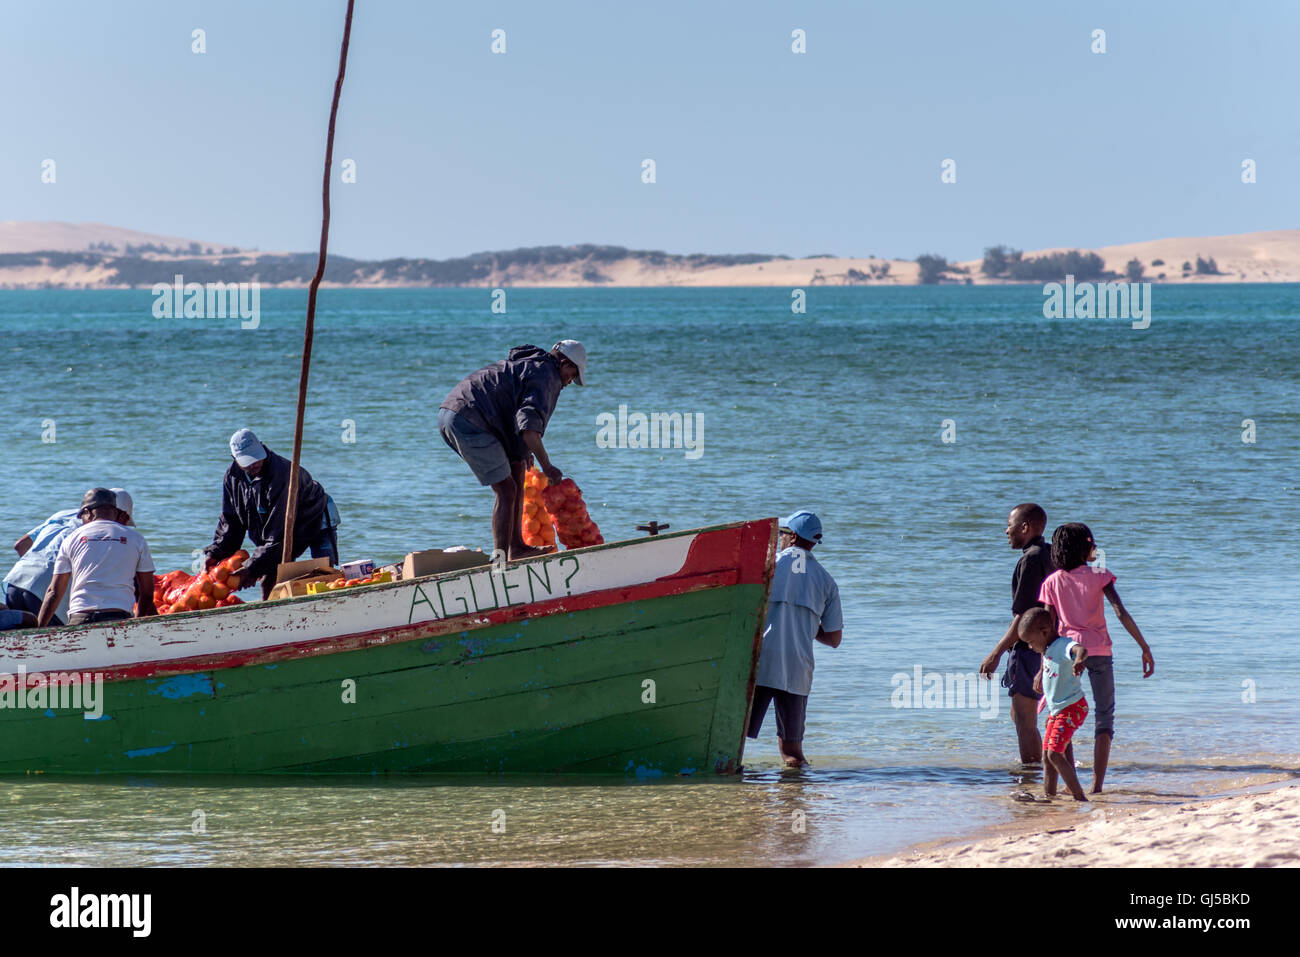 Locals unloading a dhow with provisions on the beach at Benguerra island Mozambique Stock Photo